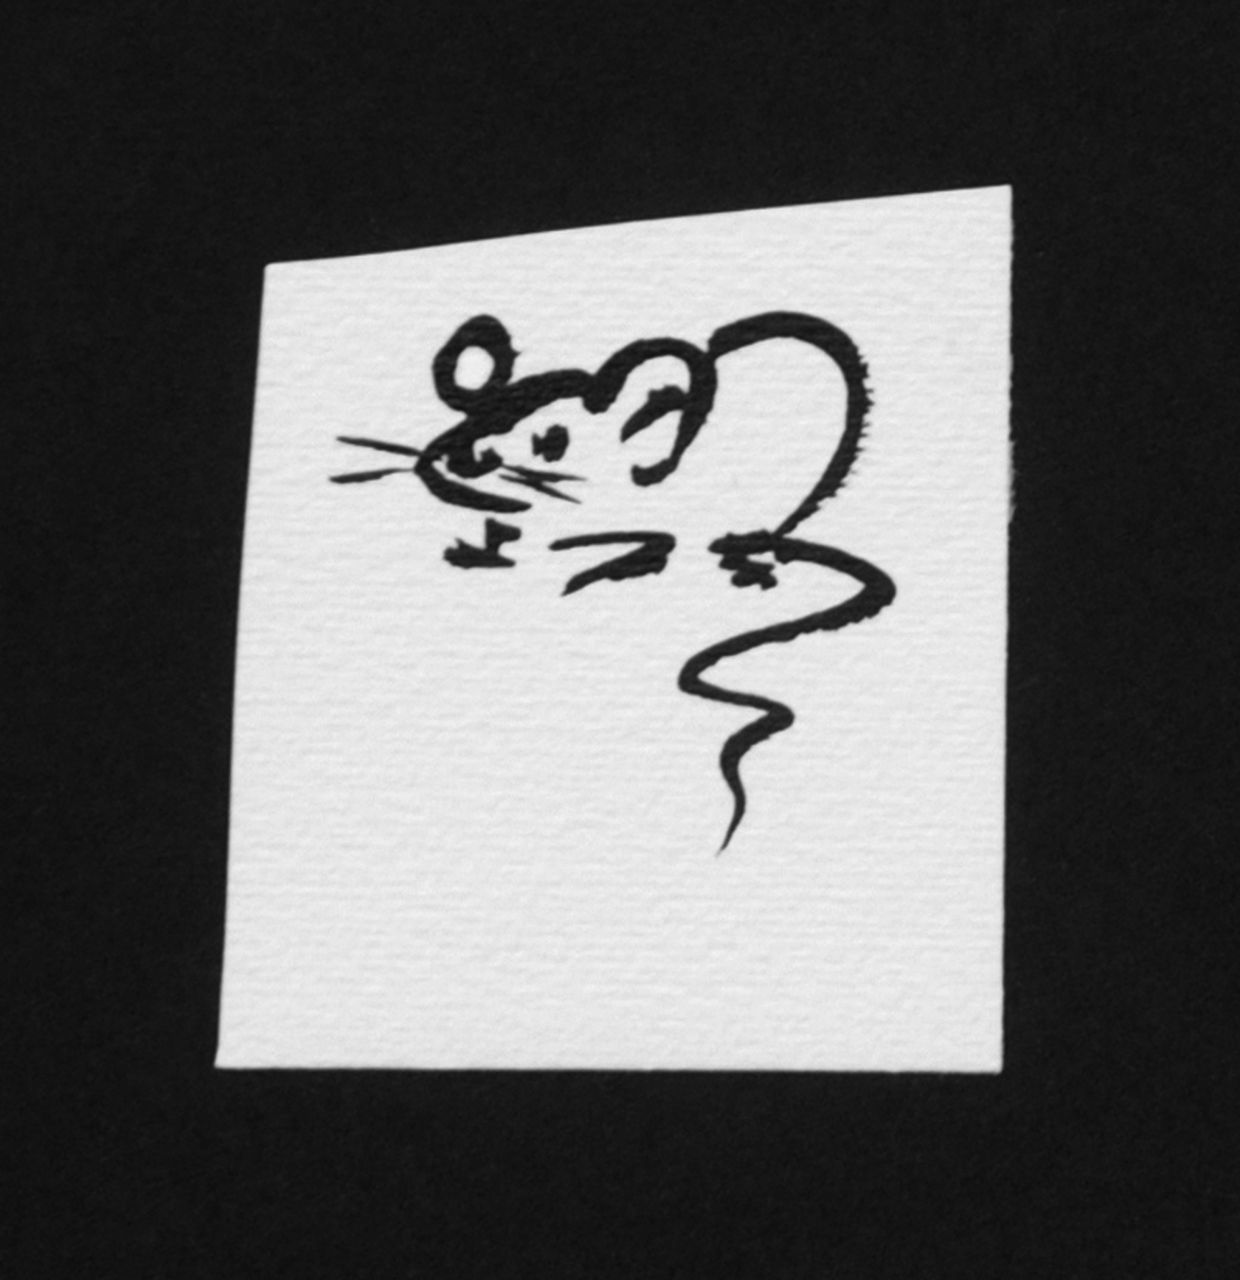 Oranje-Nassau (Prinses Beatrix) B.W.A. van | Beatrix Wilhelmina Armgard van Oranje-Nassau (Prinses Beatrix), Mouse, pencil and black ink on paper 6.6 x 5.7 cm, executed August 1960